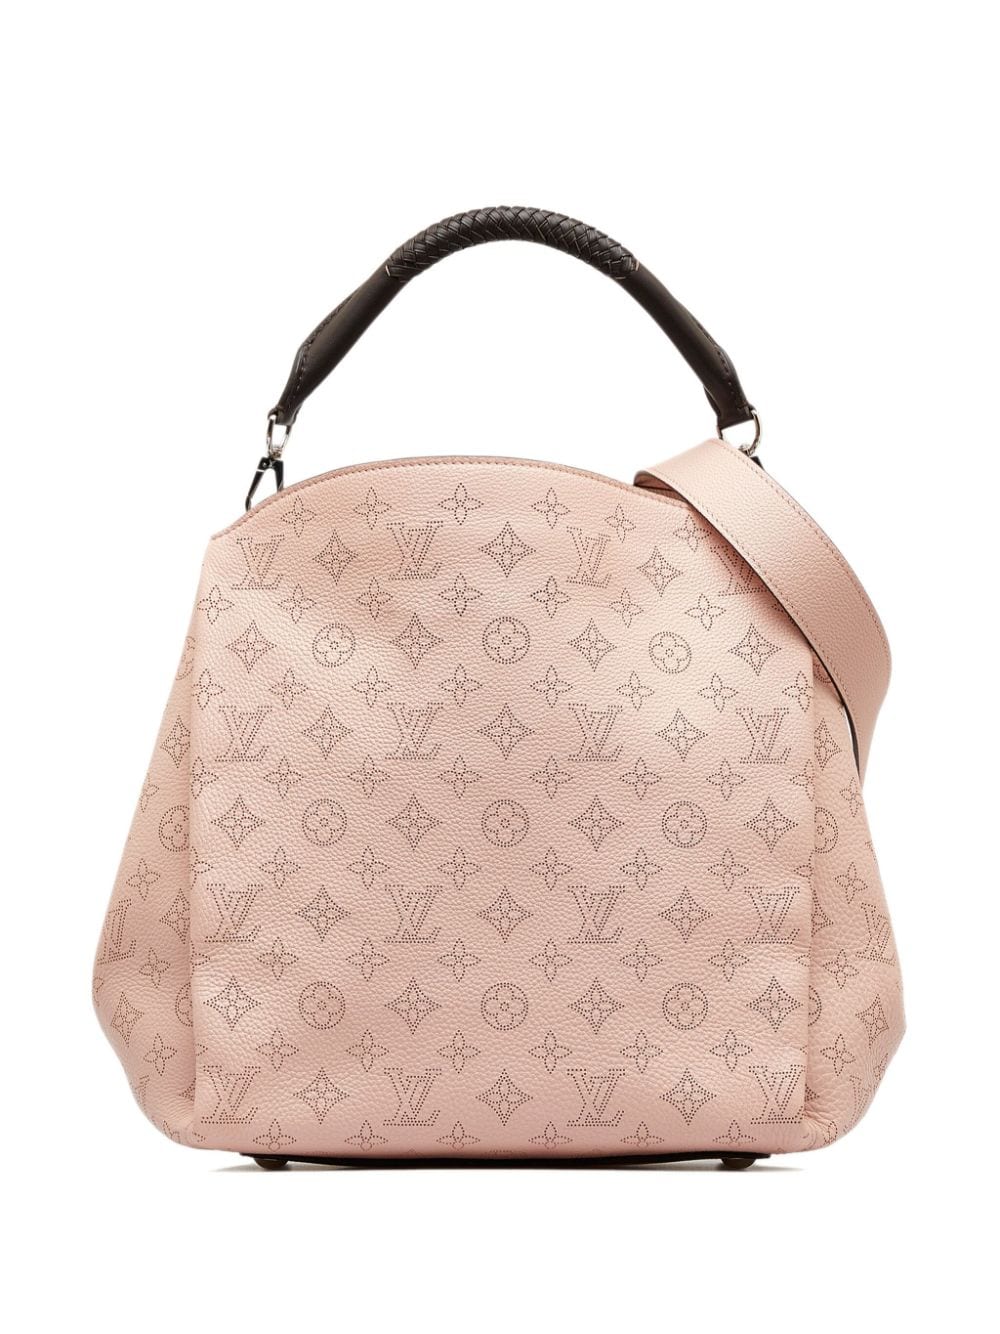 Mahina Babylone Pm bag in pink leather Louis Vuitton - Second Hand